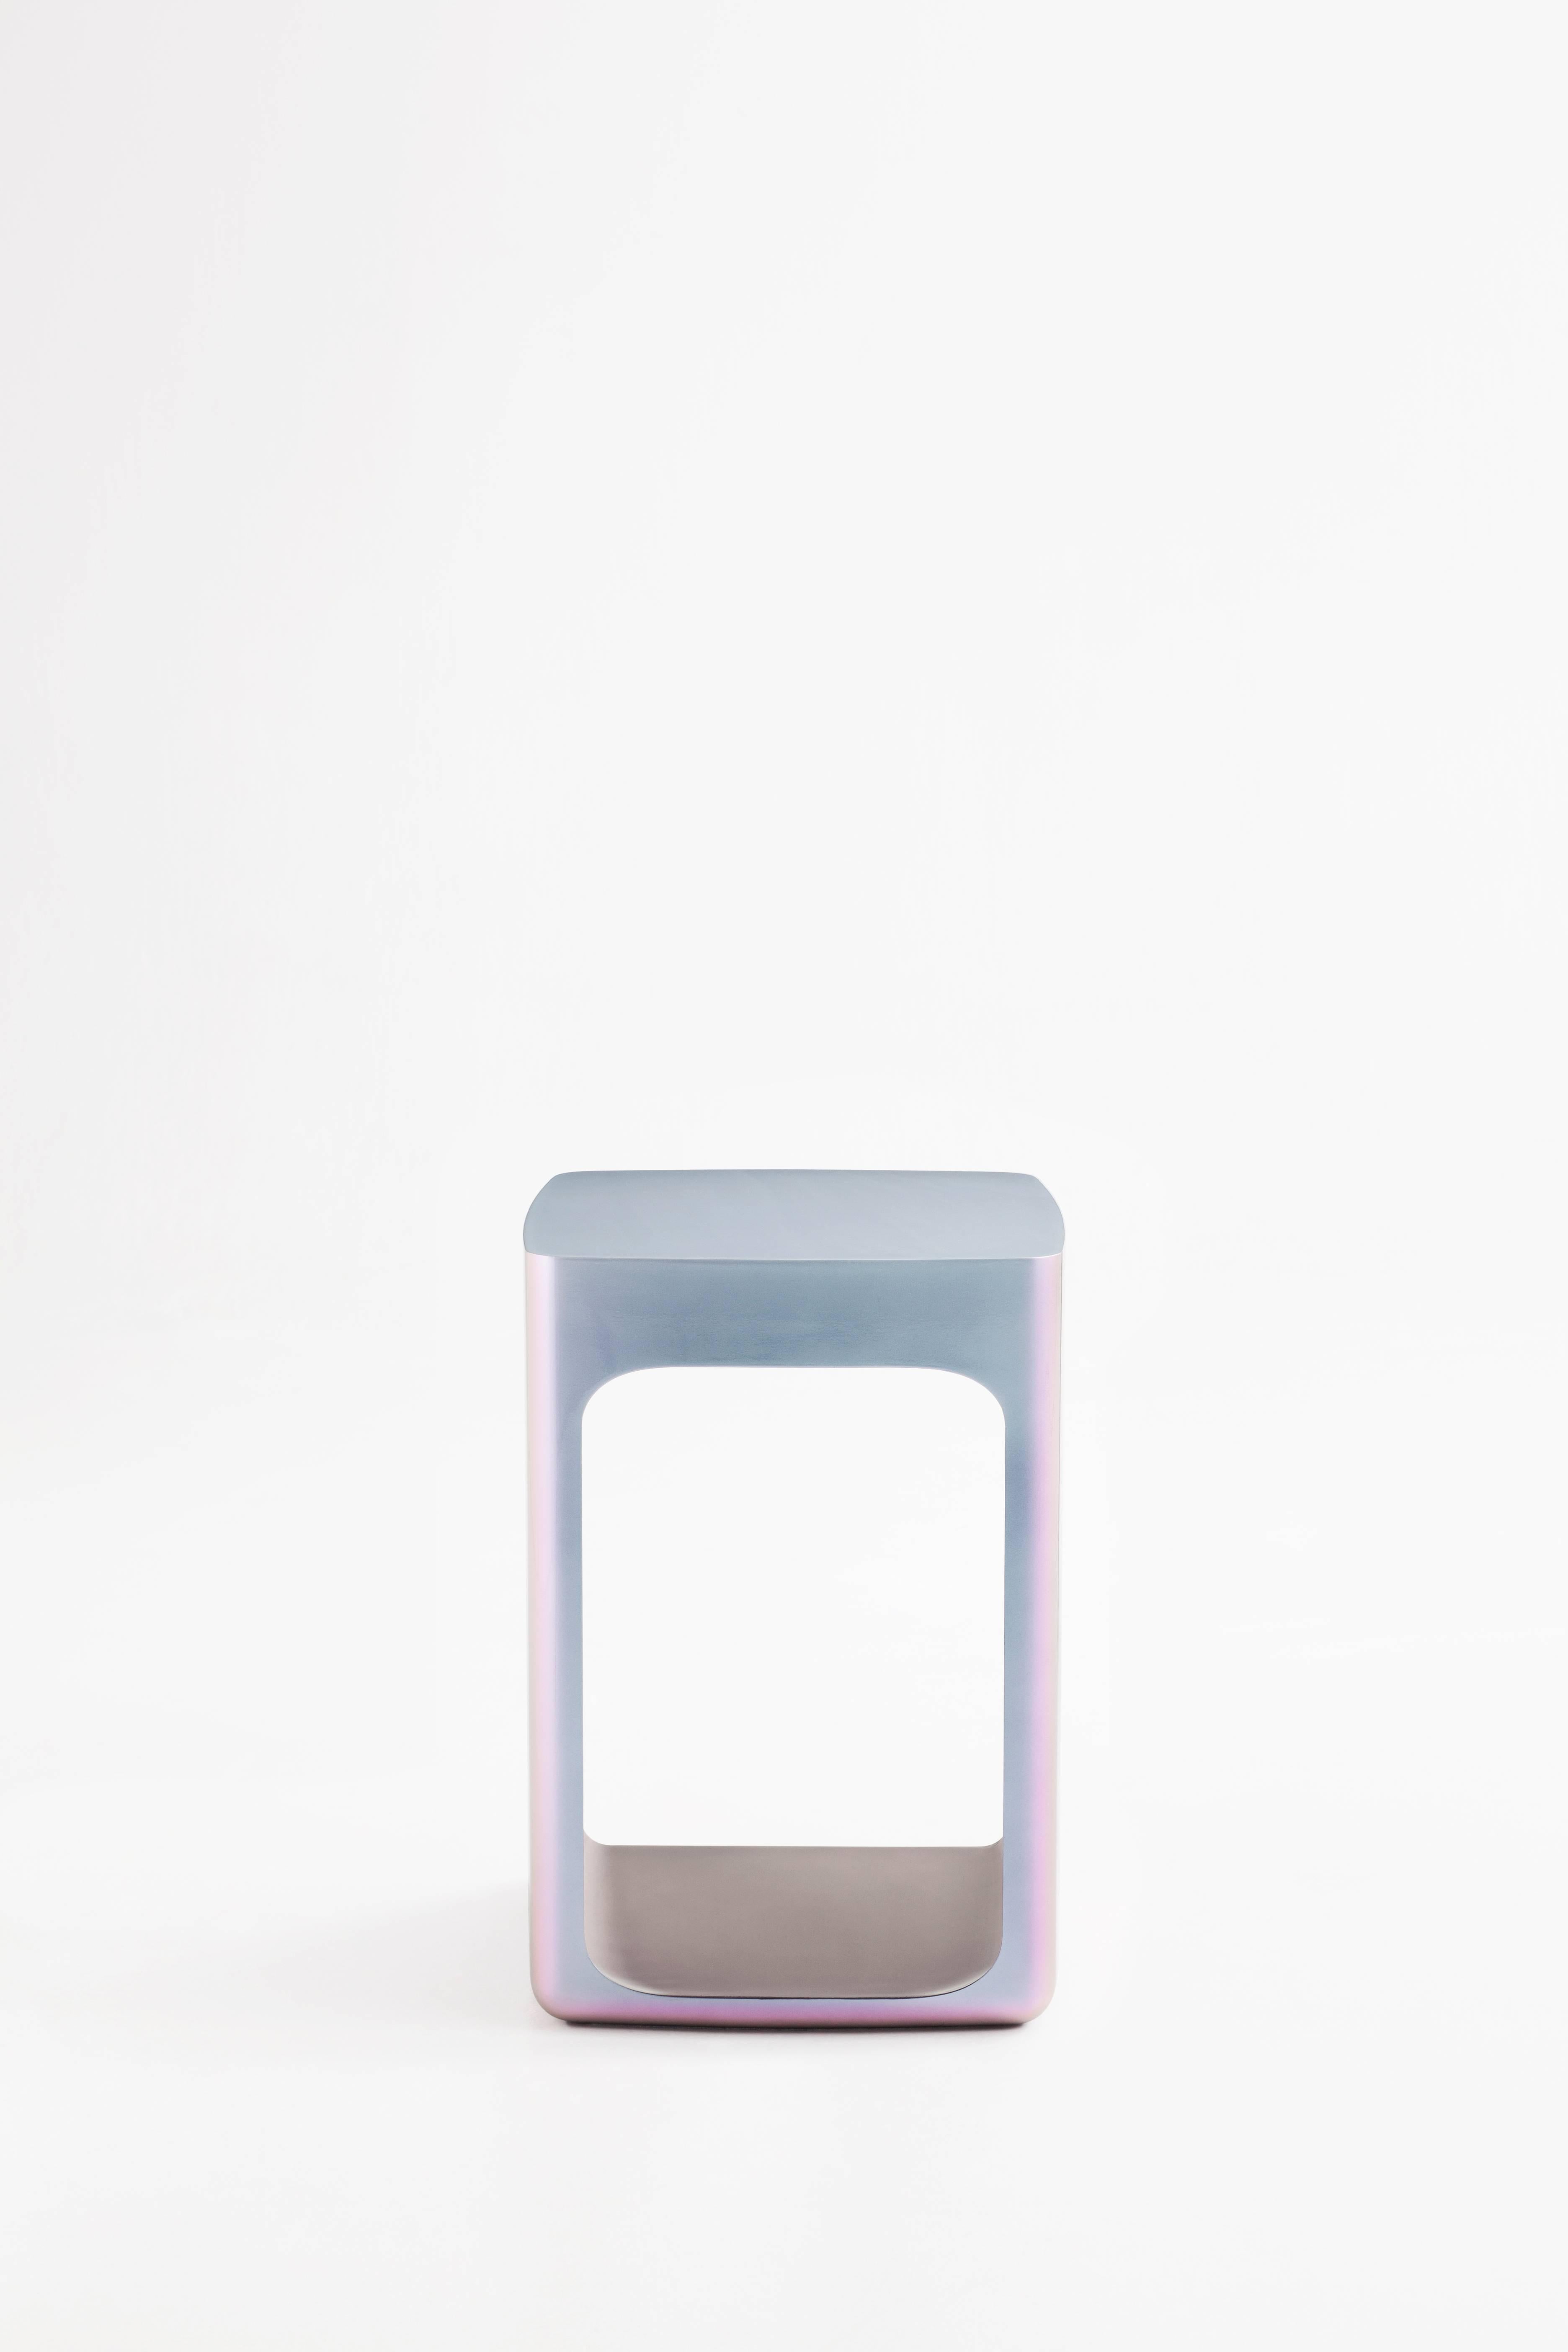 Adolfo Abejon 'Orion' side table manufactured in Barcelona.

Orion is a side table made in resine composite. It is versatile, because its design allows objects to be placed inside its inferior cavity as well as on top of it. This piece works as a